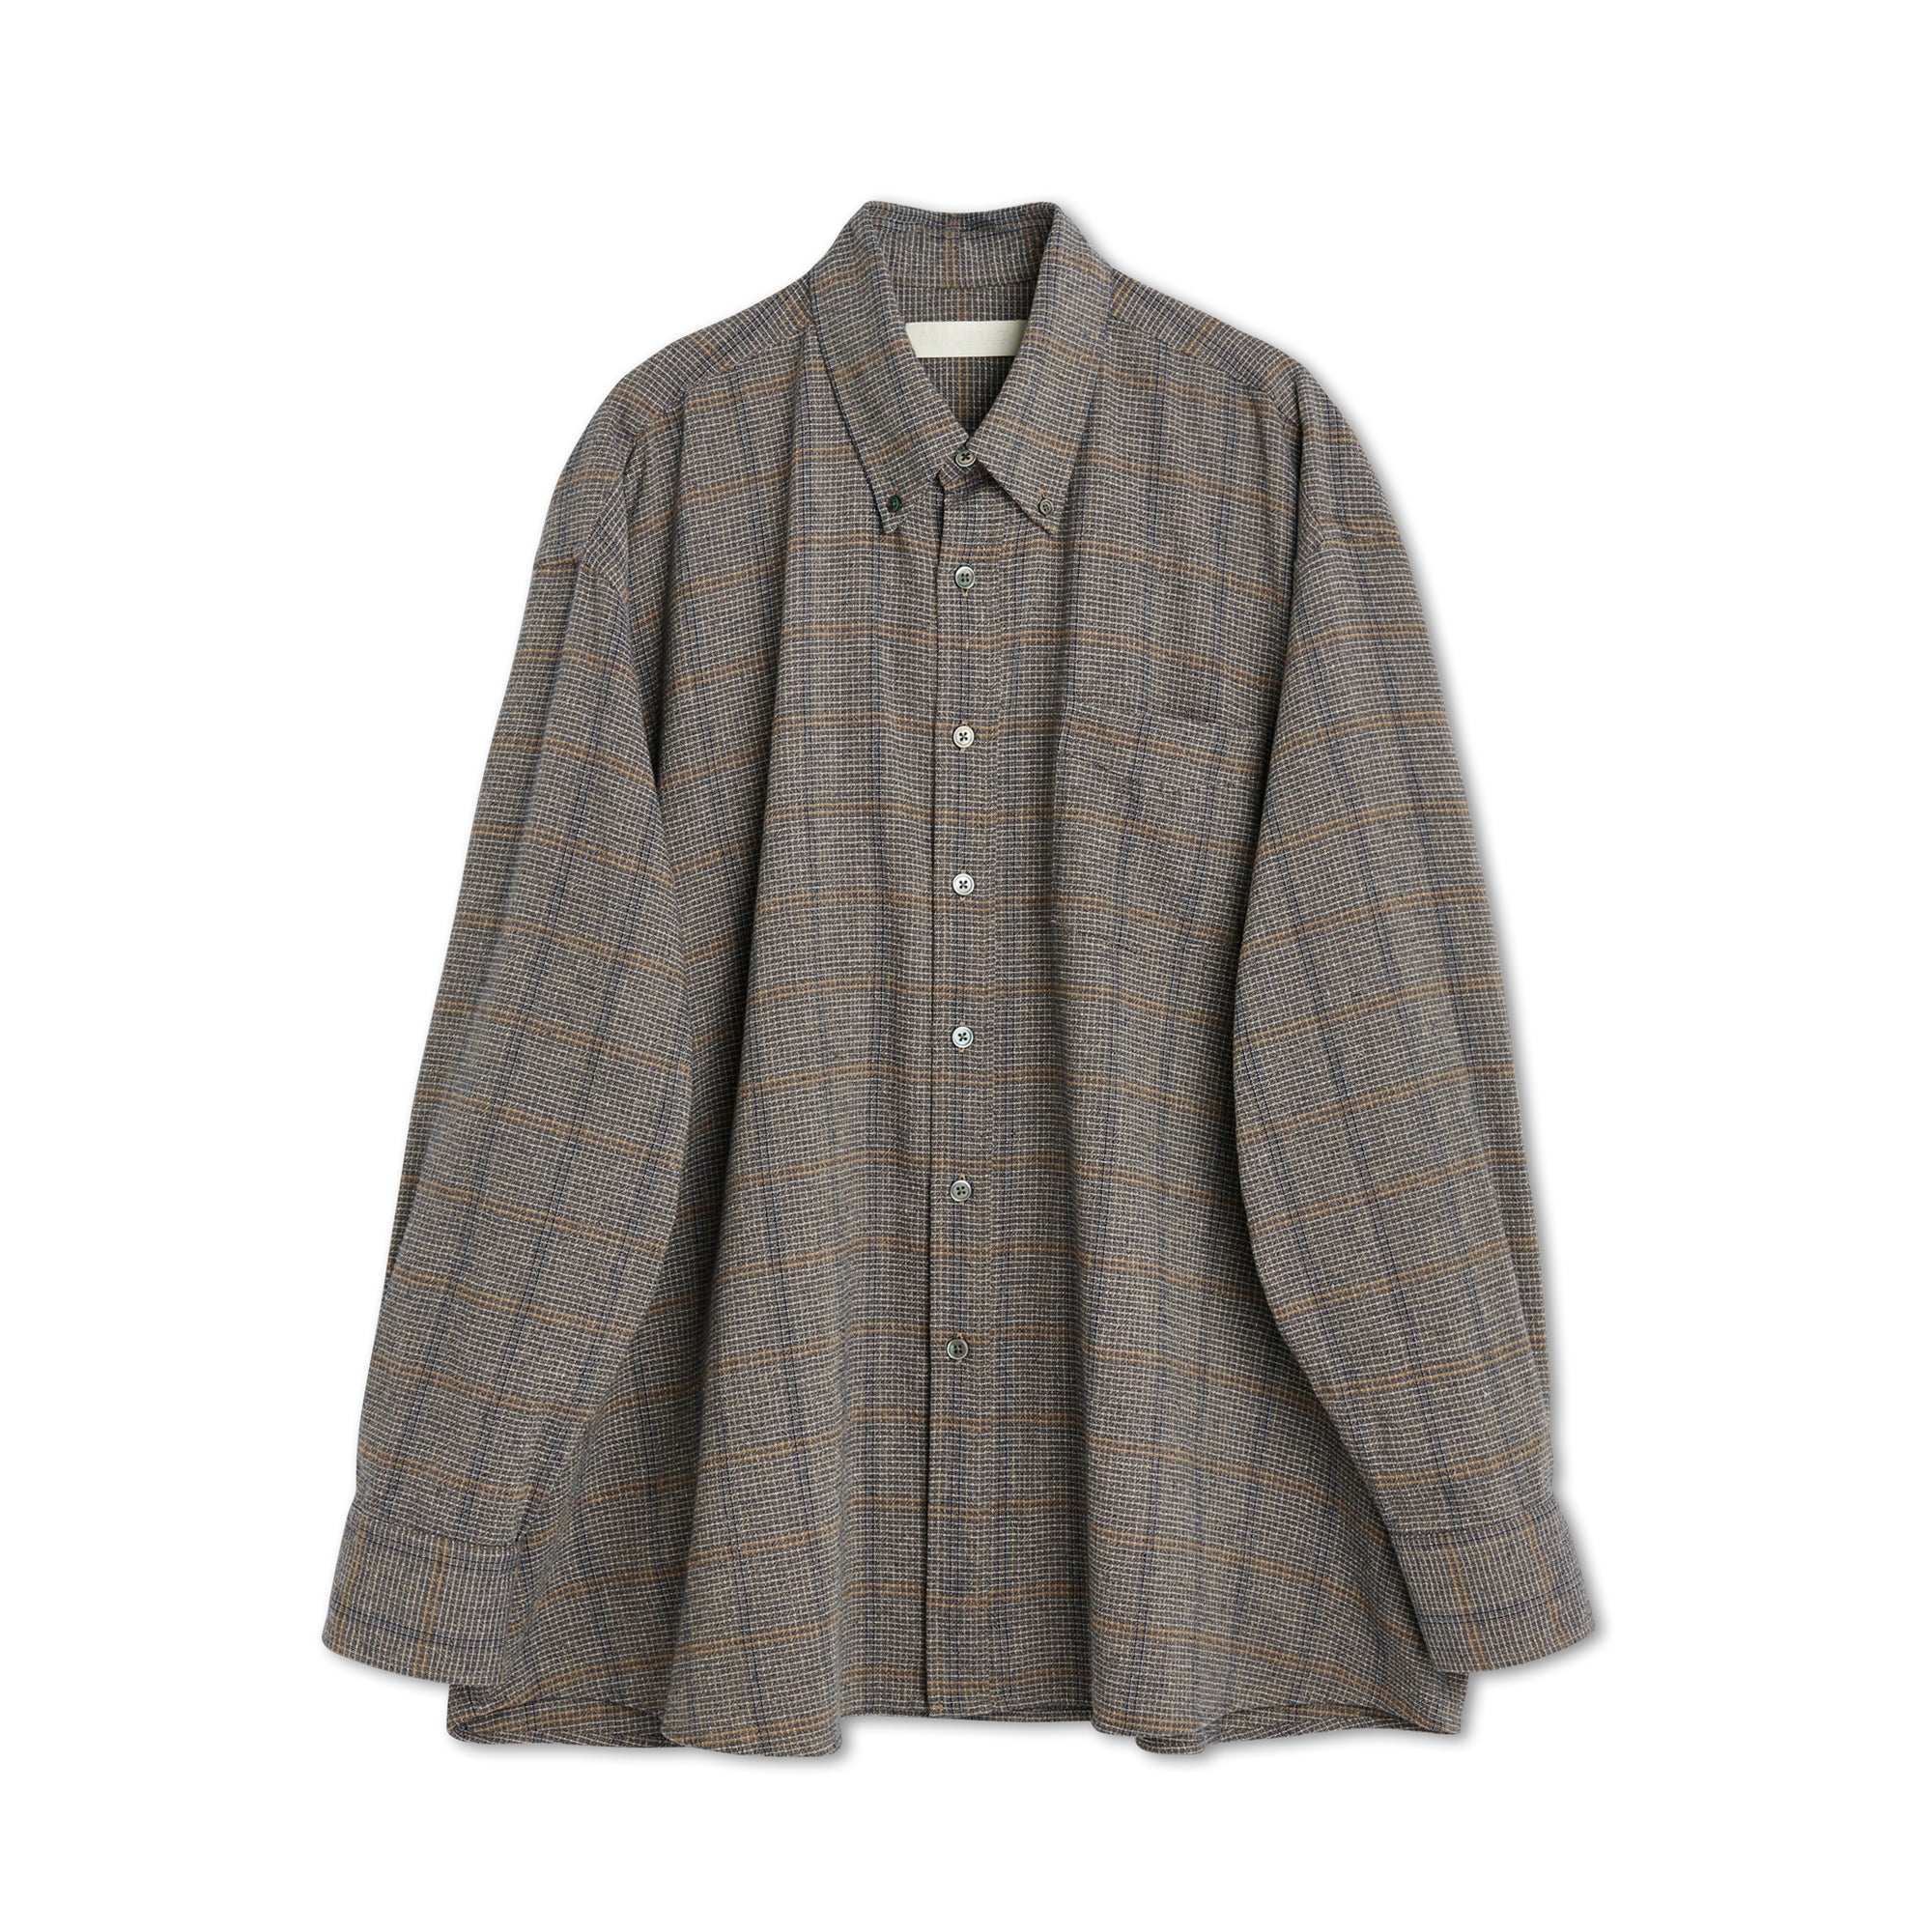 Our Legacy - Men's Borrowed Bd Shirt - (Analog) view 1